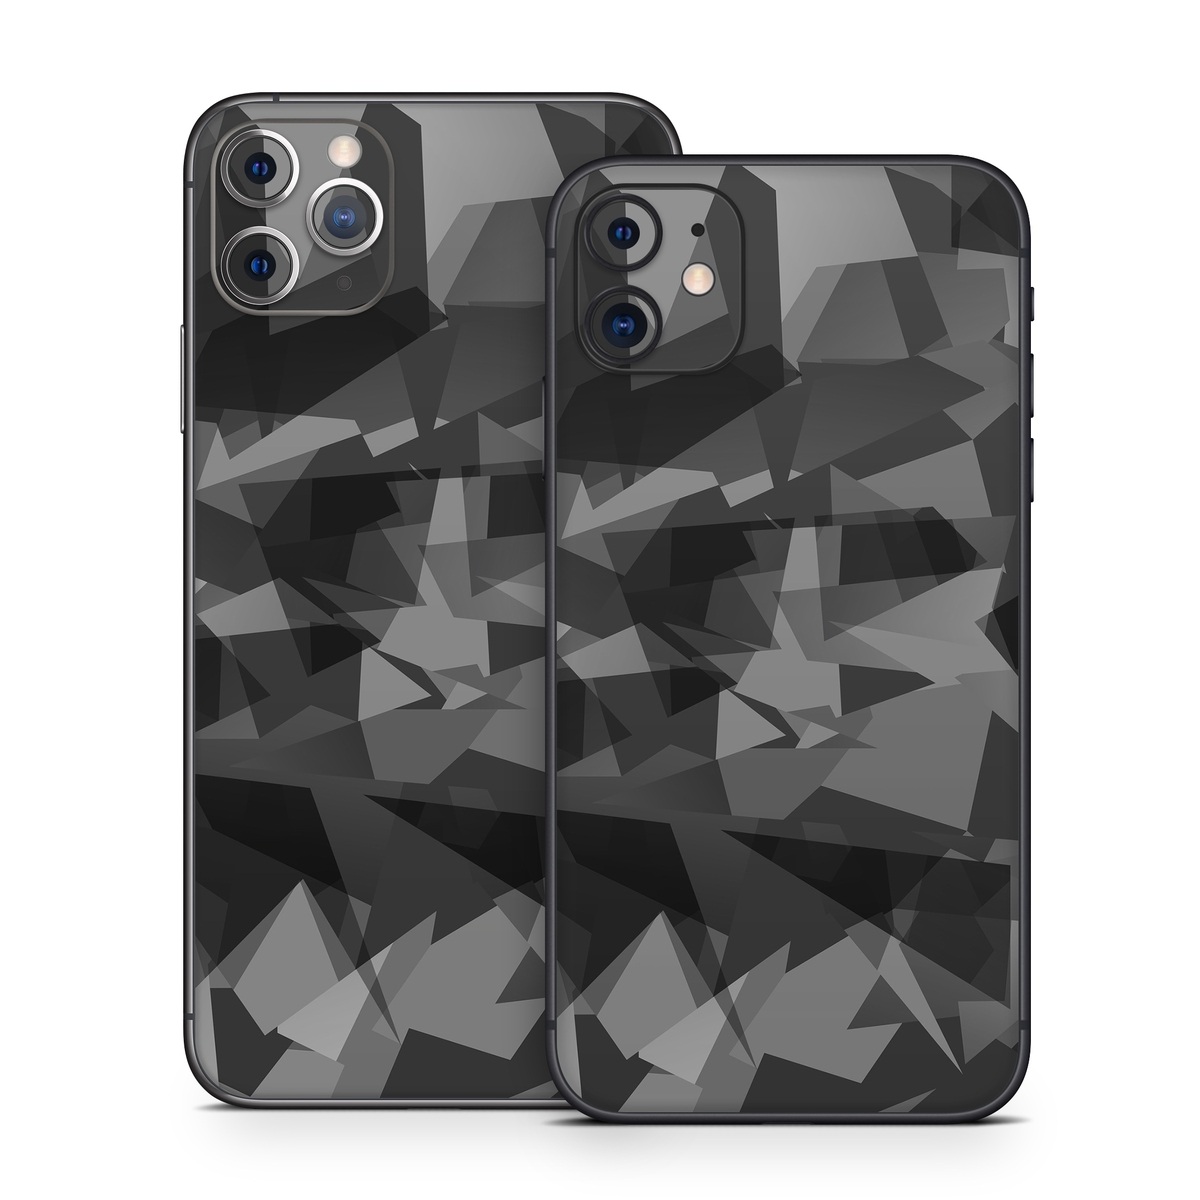 iPhone 11 Series Skin design of Black, Pattern, Triangle, Black-and-white, Monochrome, Grey, Design, Line, Architecture, Monochrome photography, with black, gray colors